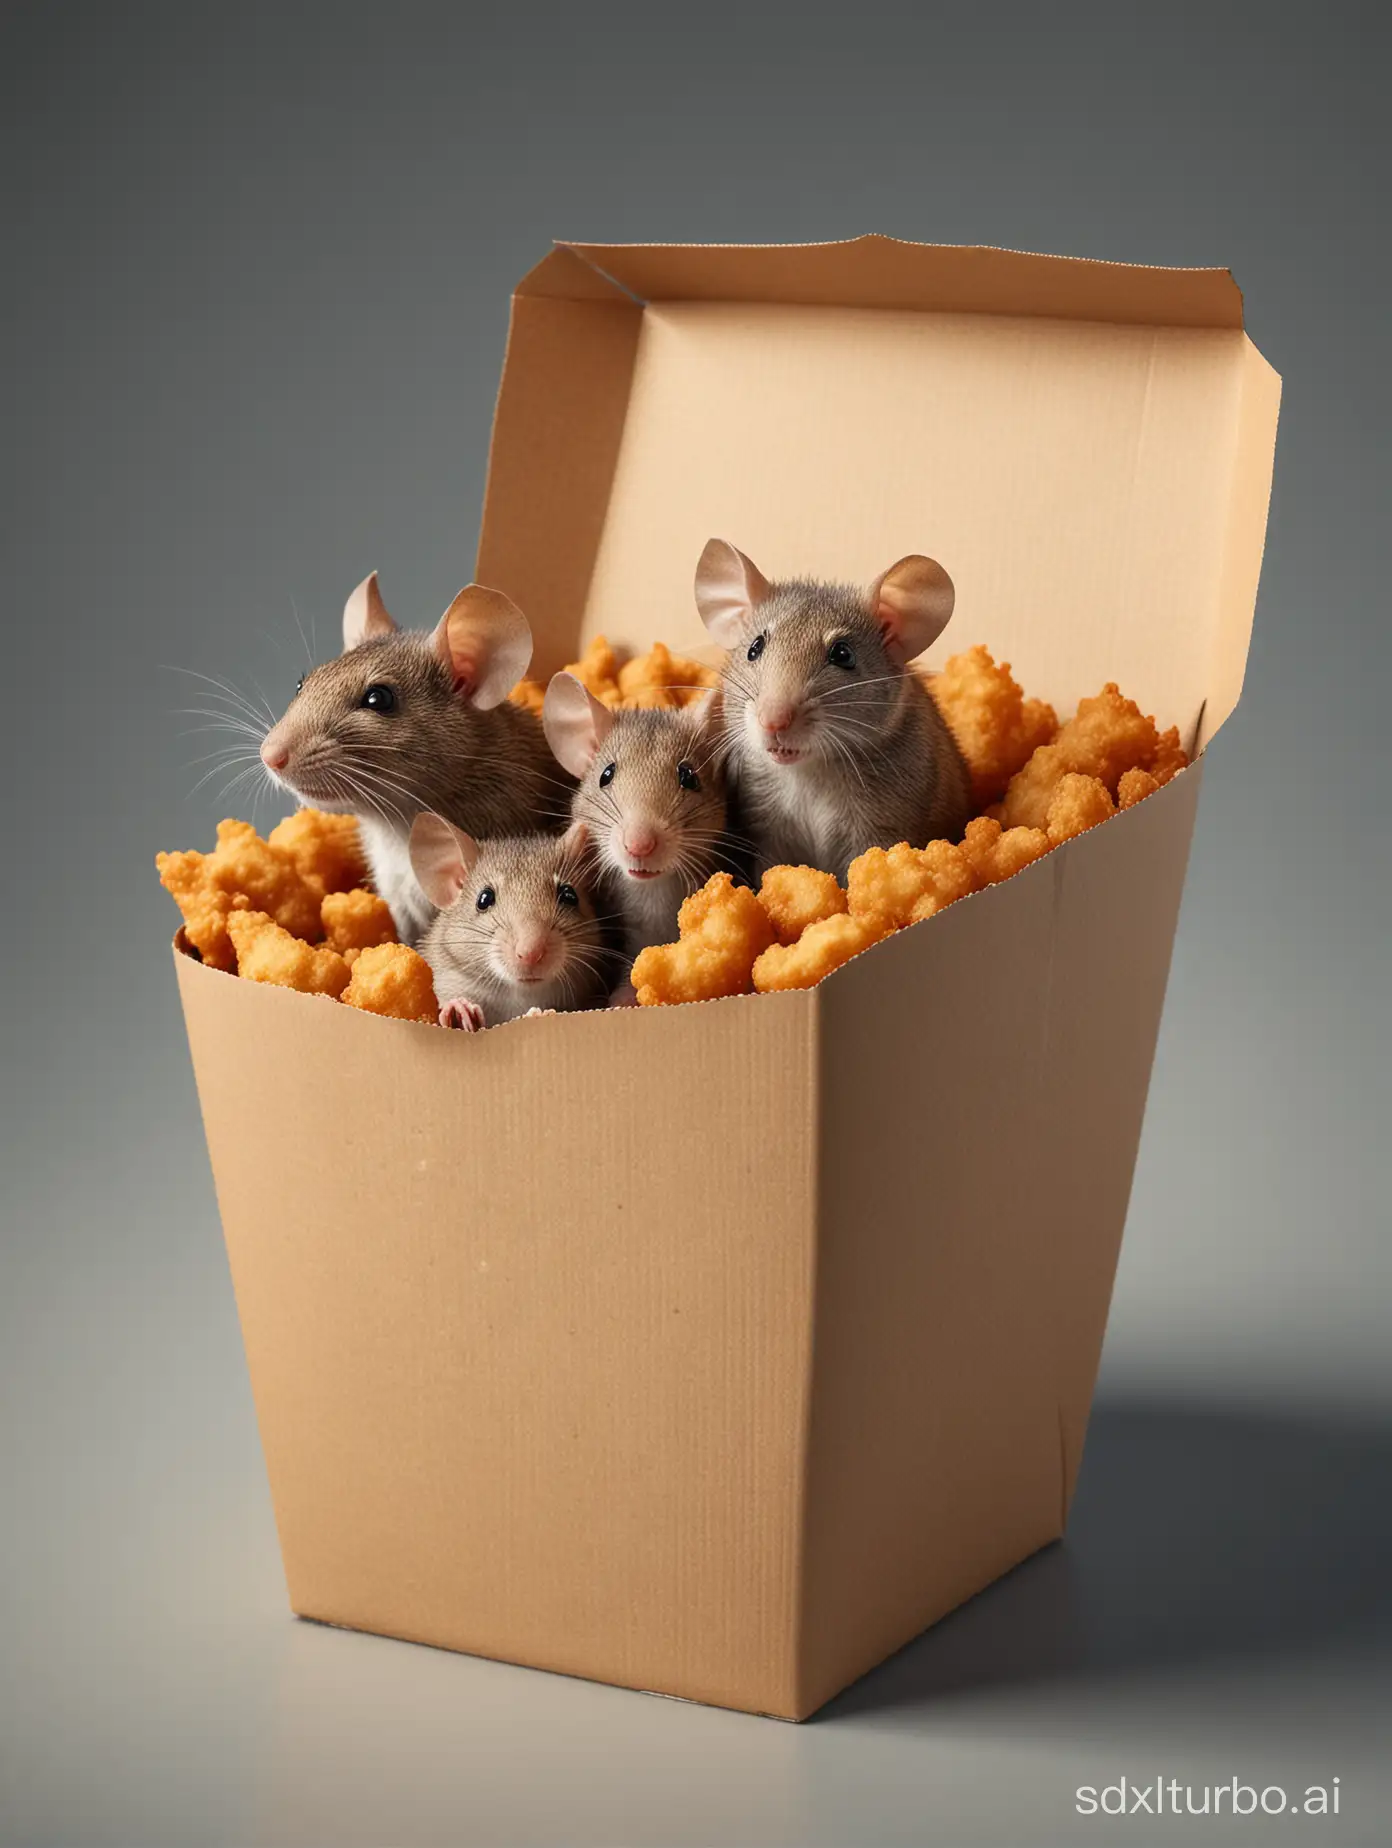 Crispy Southern deep fried breaded rats  in a large cardboard takeout takeaway style fast food  bucket  A Realistic high resolution 64 bit photo quality rendering.